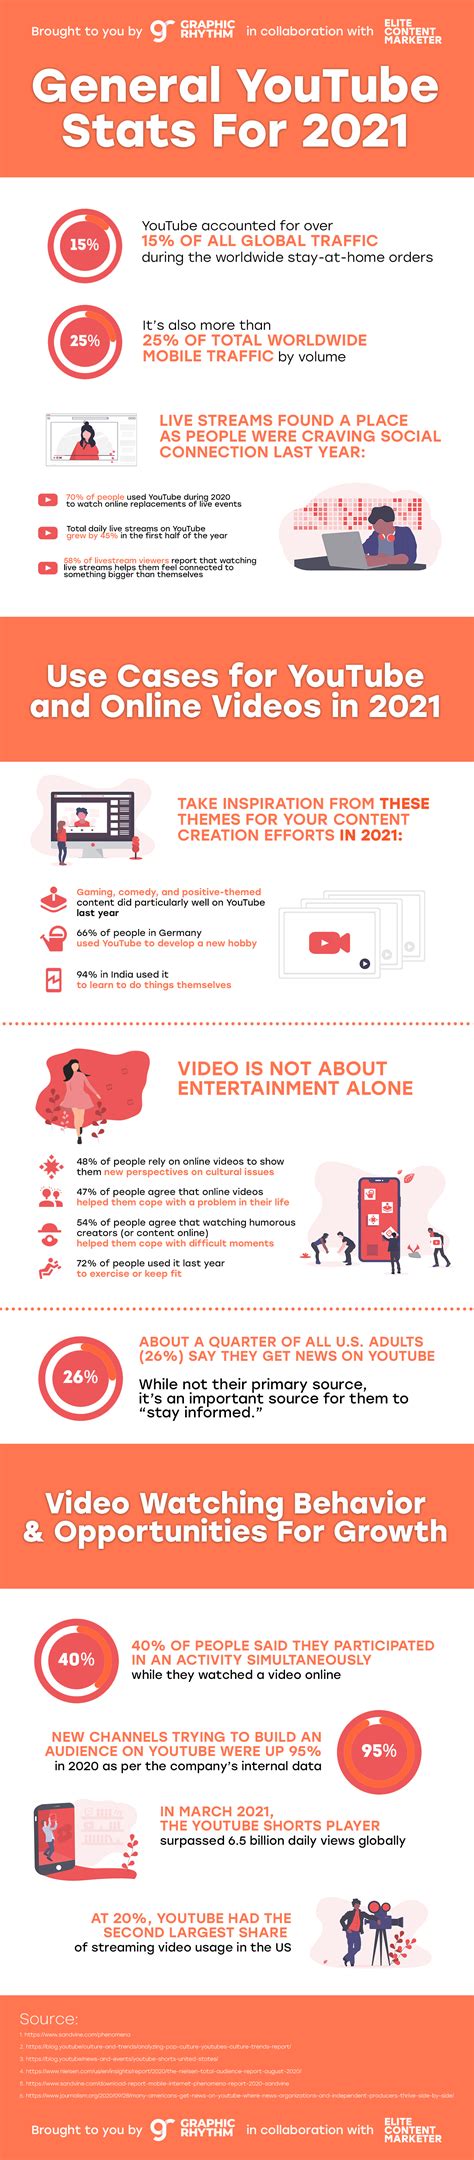 State Of Youtube In 2021 Infographic Business2community